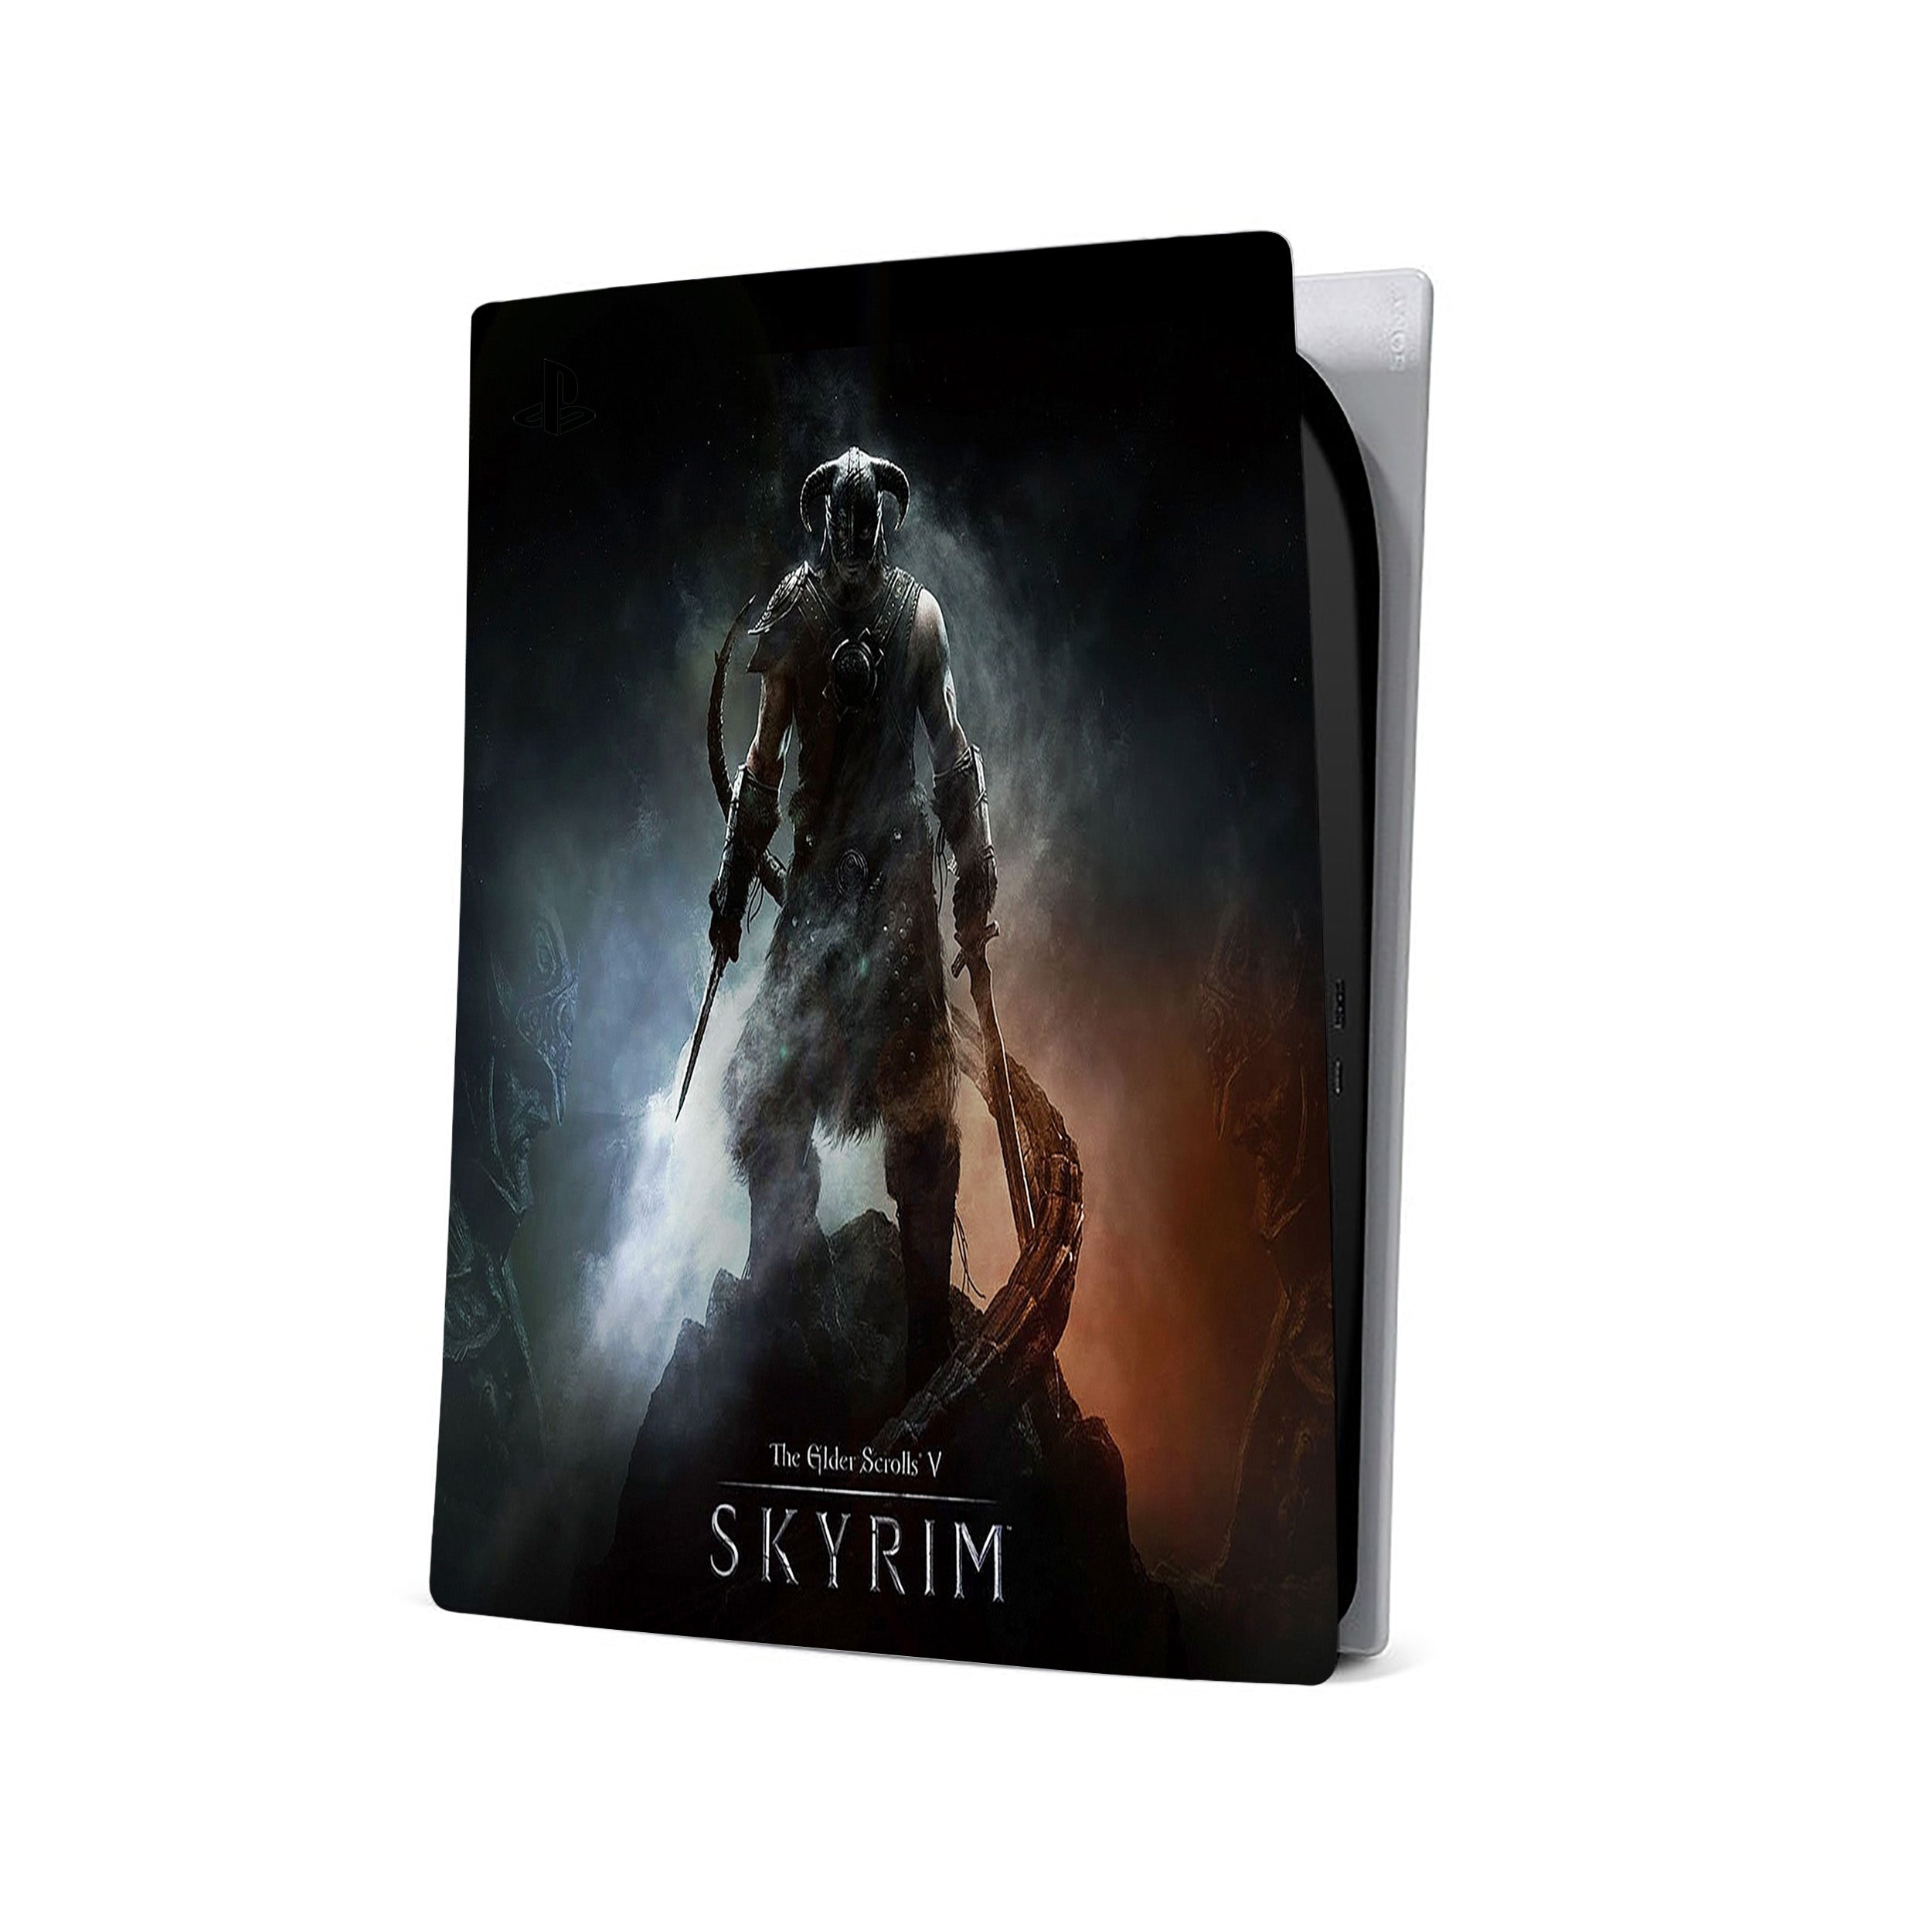 A video game skin featuring a The Elder Scrolls 4 Skyrim design for the PS5.